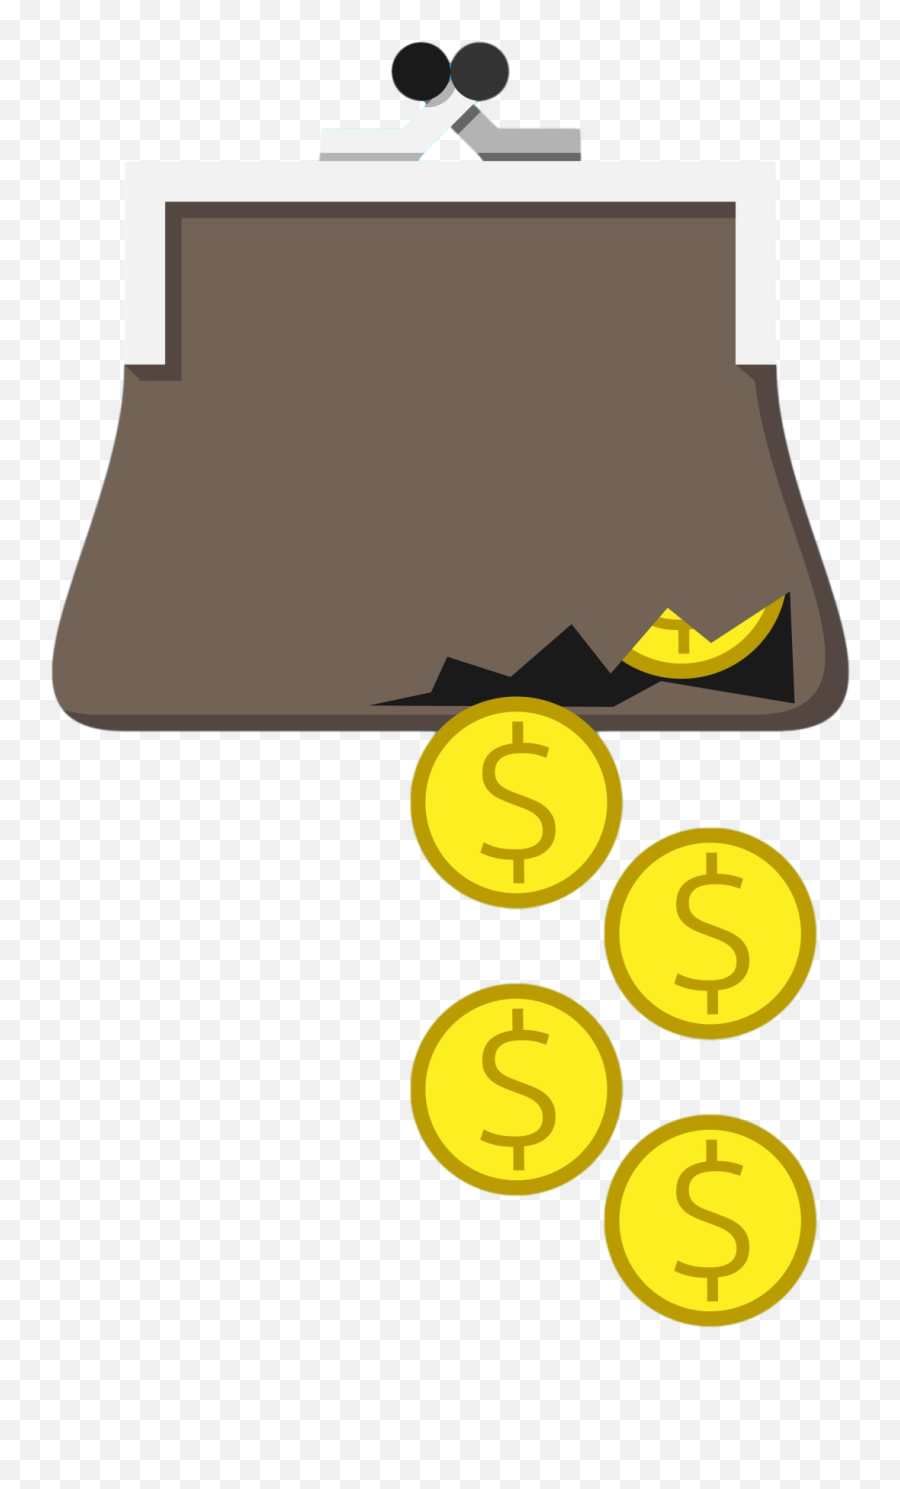 Solo Build It A Review Of My Journey To A Profitable Business - Clip Art Emoji,Raise The Roof Emoticon